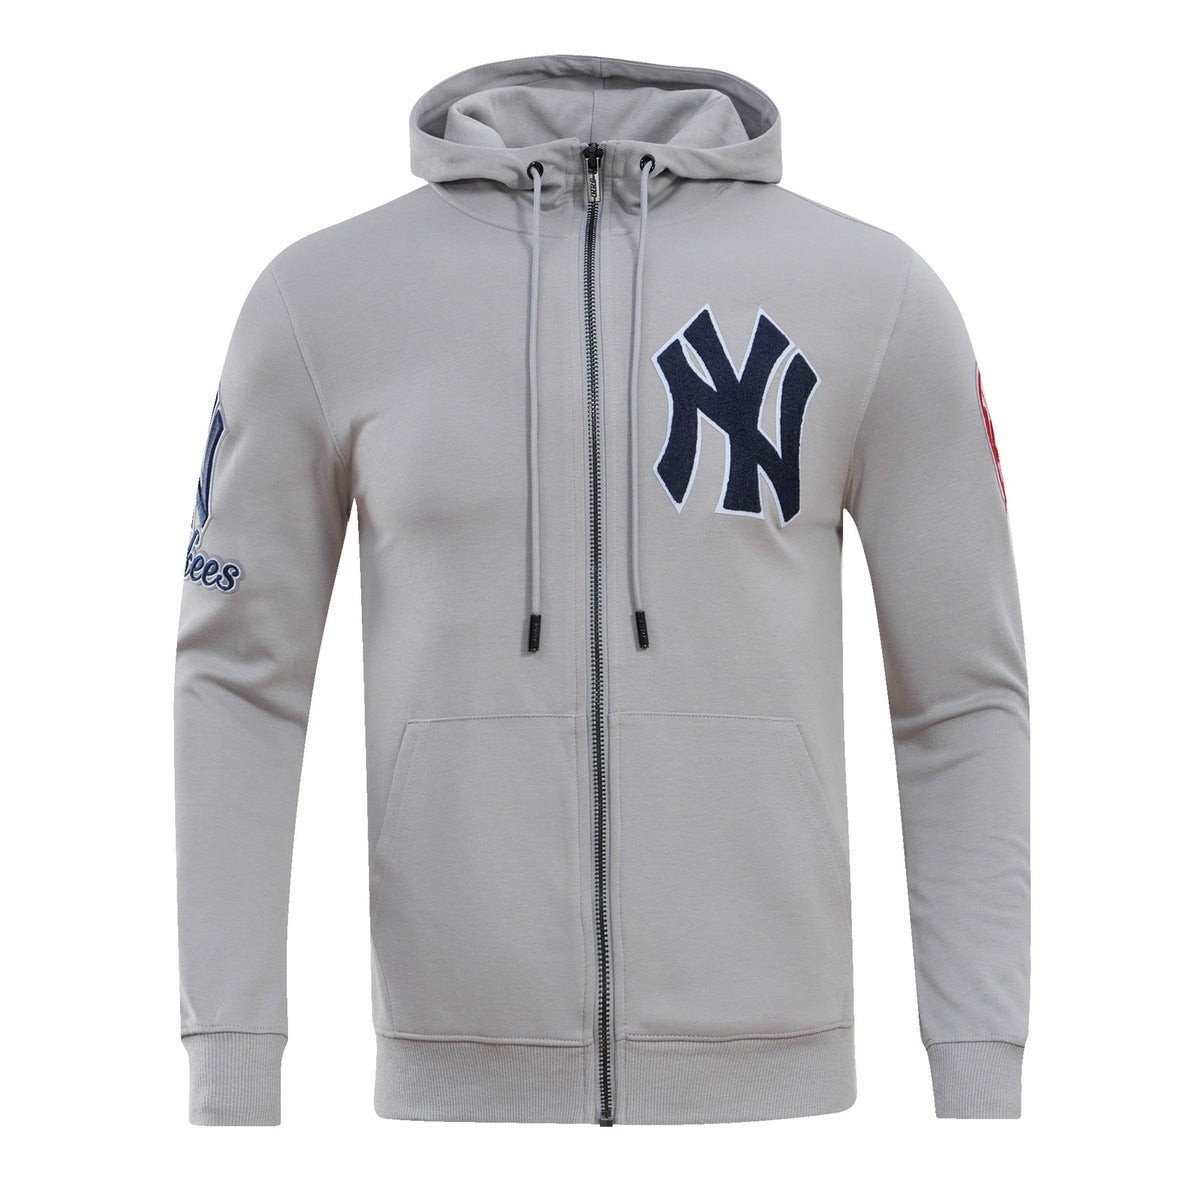 Luxury wear collection licenced by MLB League teams | Pro Standard